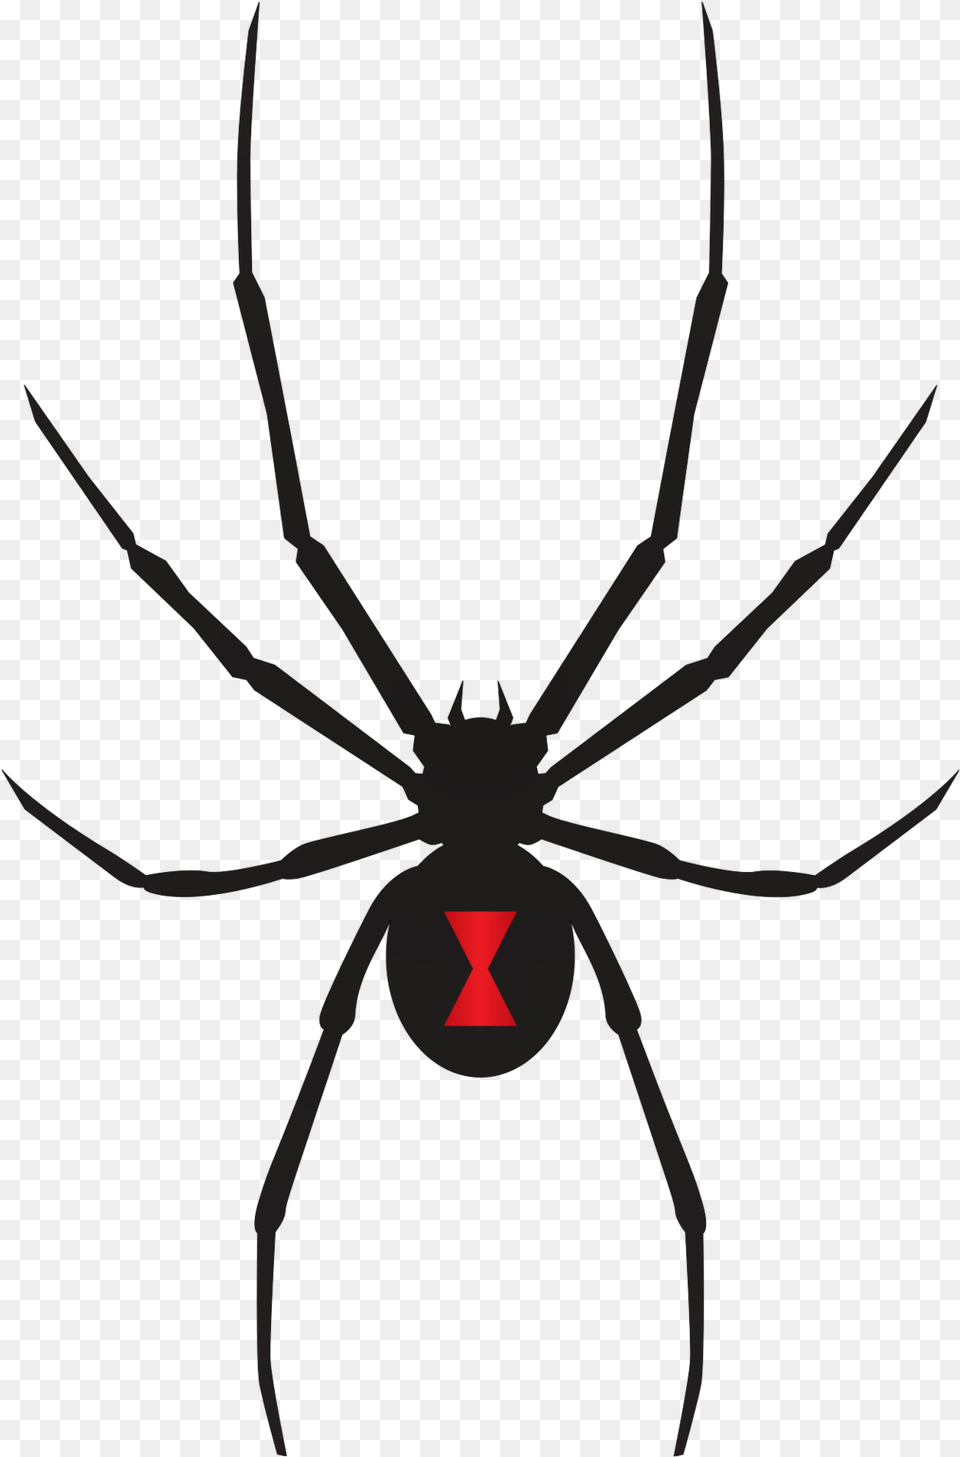 Black Widow Spider Svg, Animal, Invertebrate, Black Widow, Insect Free Png